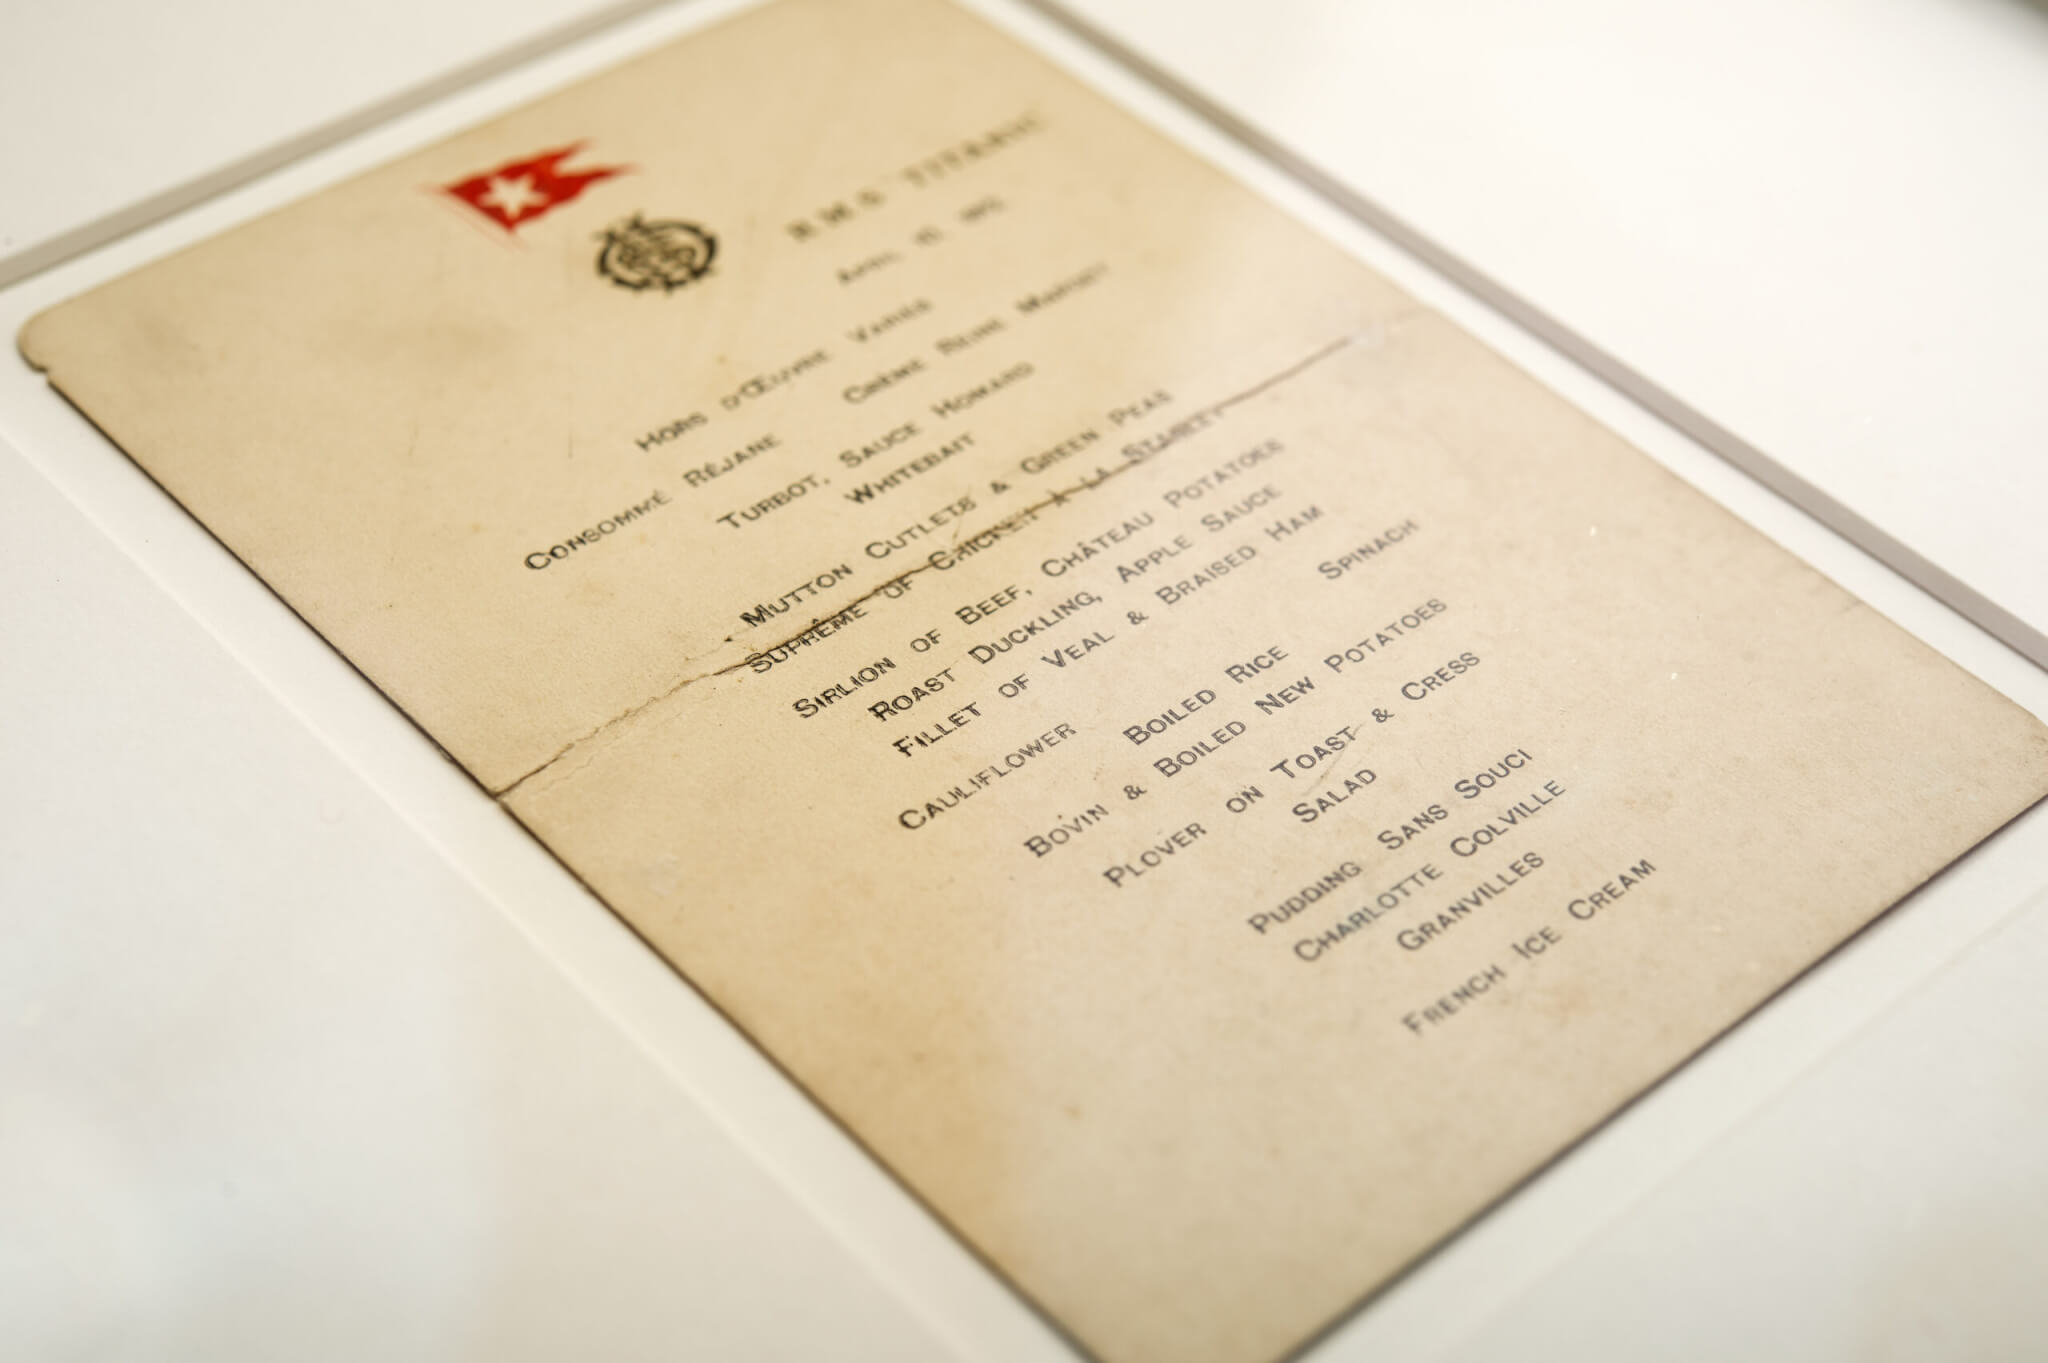 Pictured: Elsewhere in the sale, a rare first class dinner menu for April 10, 1912 - the day the liner left Southampton on her doomed maiden voyage, sold for £50,000.

A pocket watch that stopped at the very moment its owner went down with the Titanic has sold at auction for £122,000.

Oscar Woody perished along with 1,520 others when the ill-fated ship struck an iceberg and sank in the Atlantic in 1912.
Elsewhere in the sale, a rare first class dinner menu for April 10, 1912 - the day the liner left Southampton on her doomed maiden voyage, sold for £50,000.